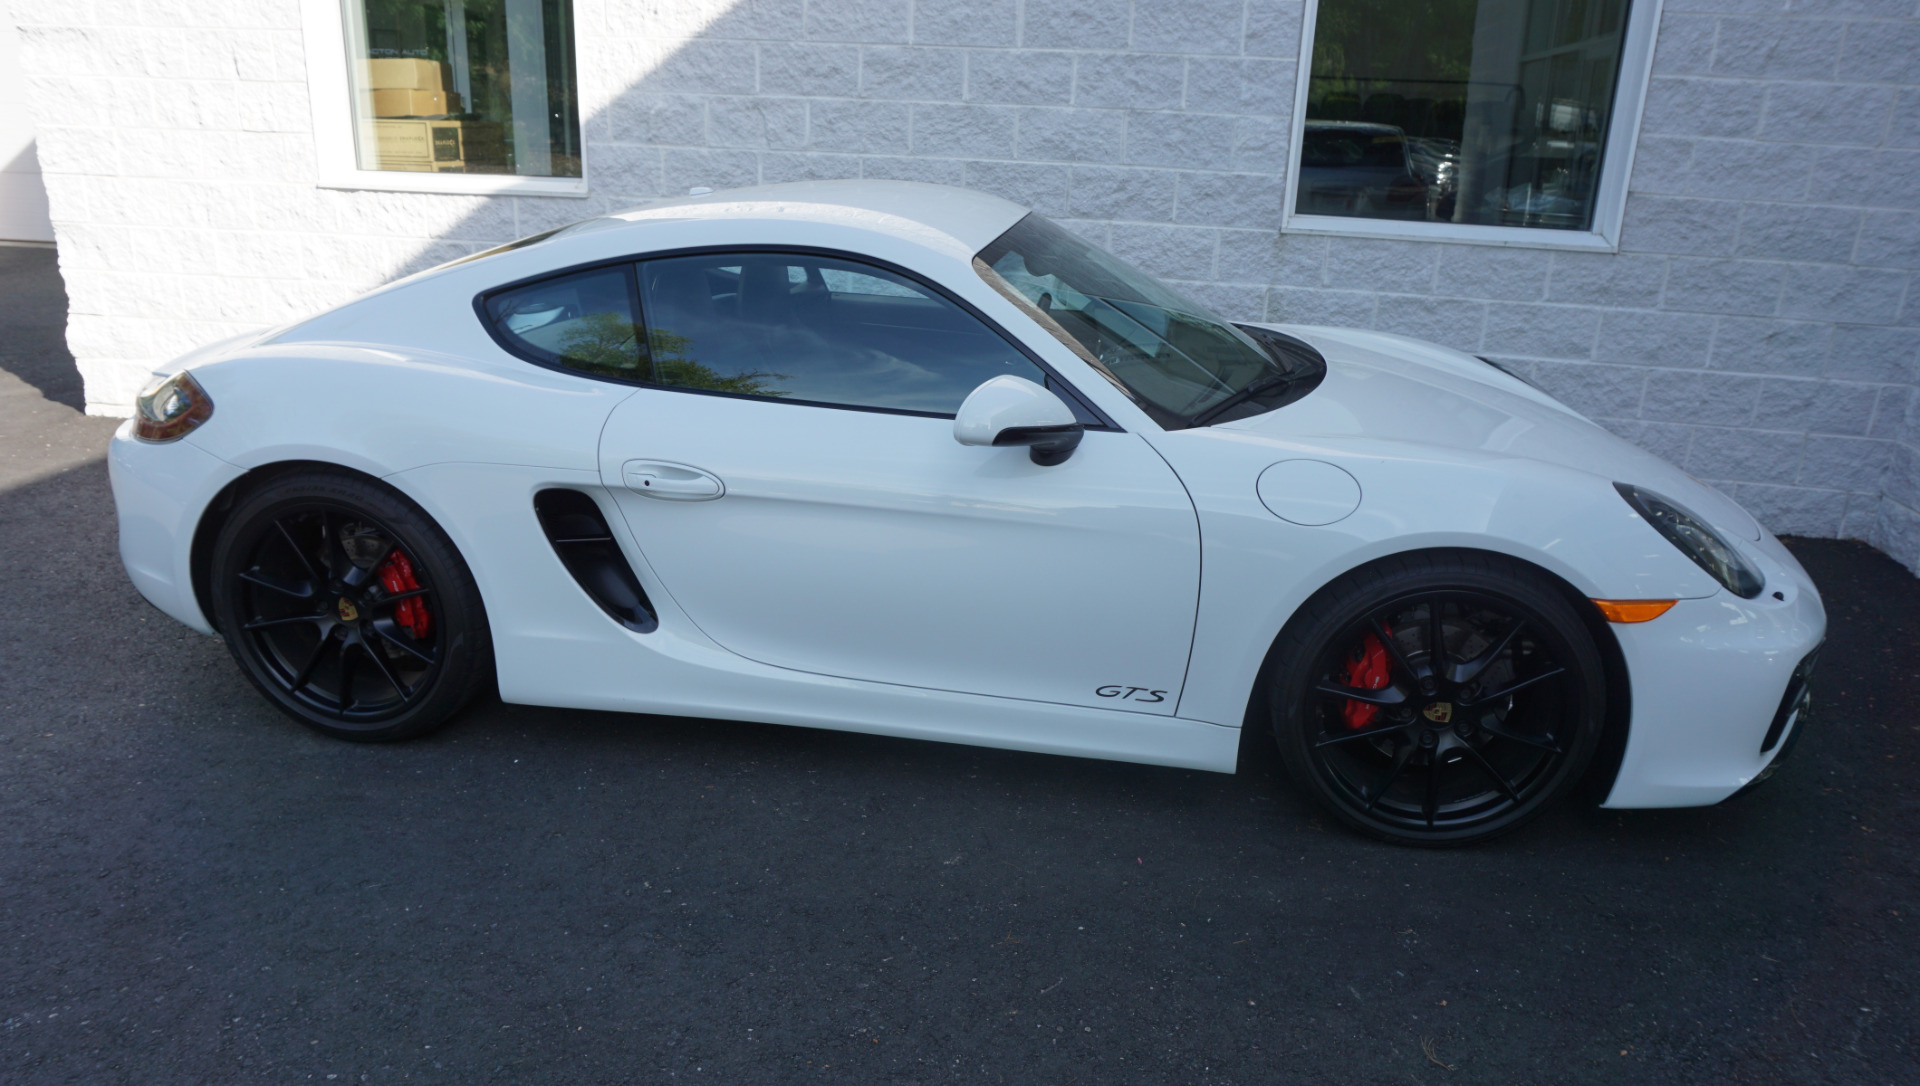 Used Porsche 718 Cayman GTS 2016-2020 review